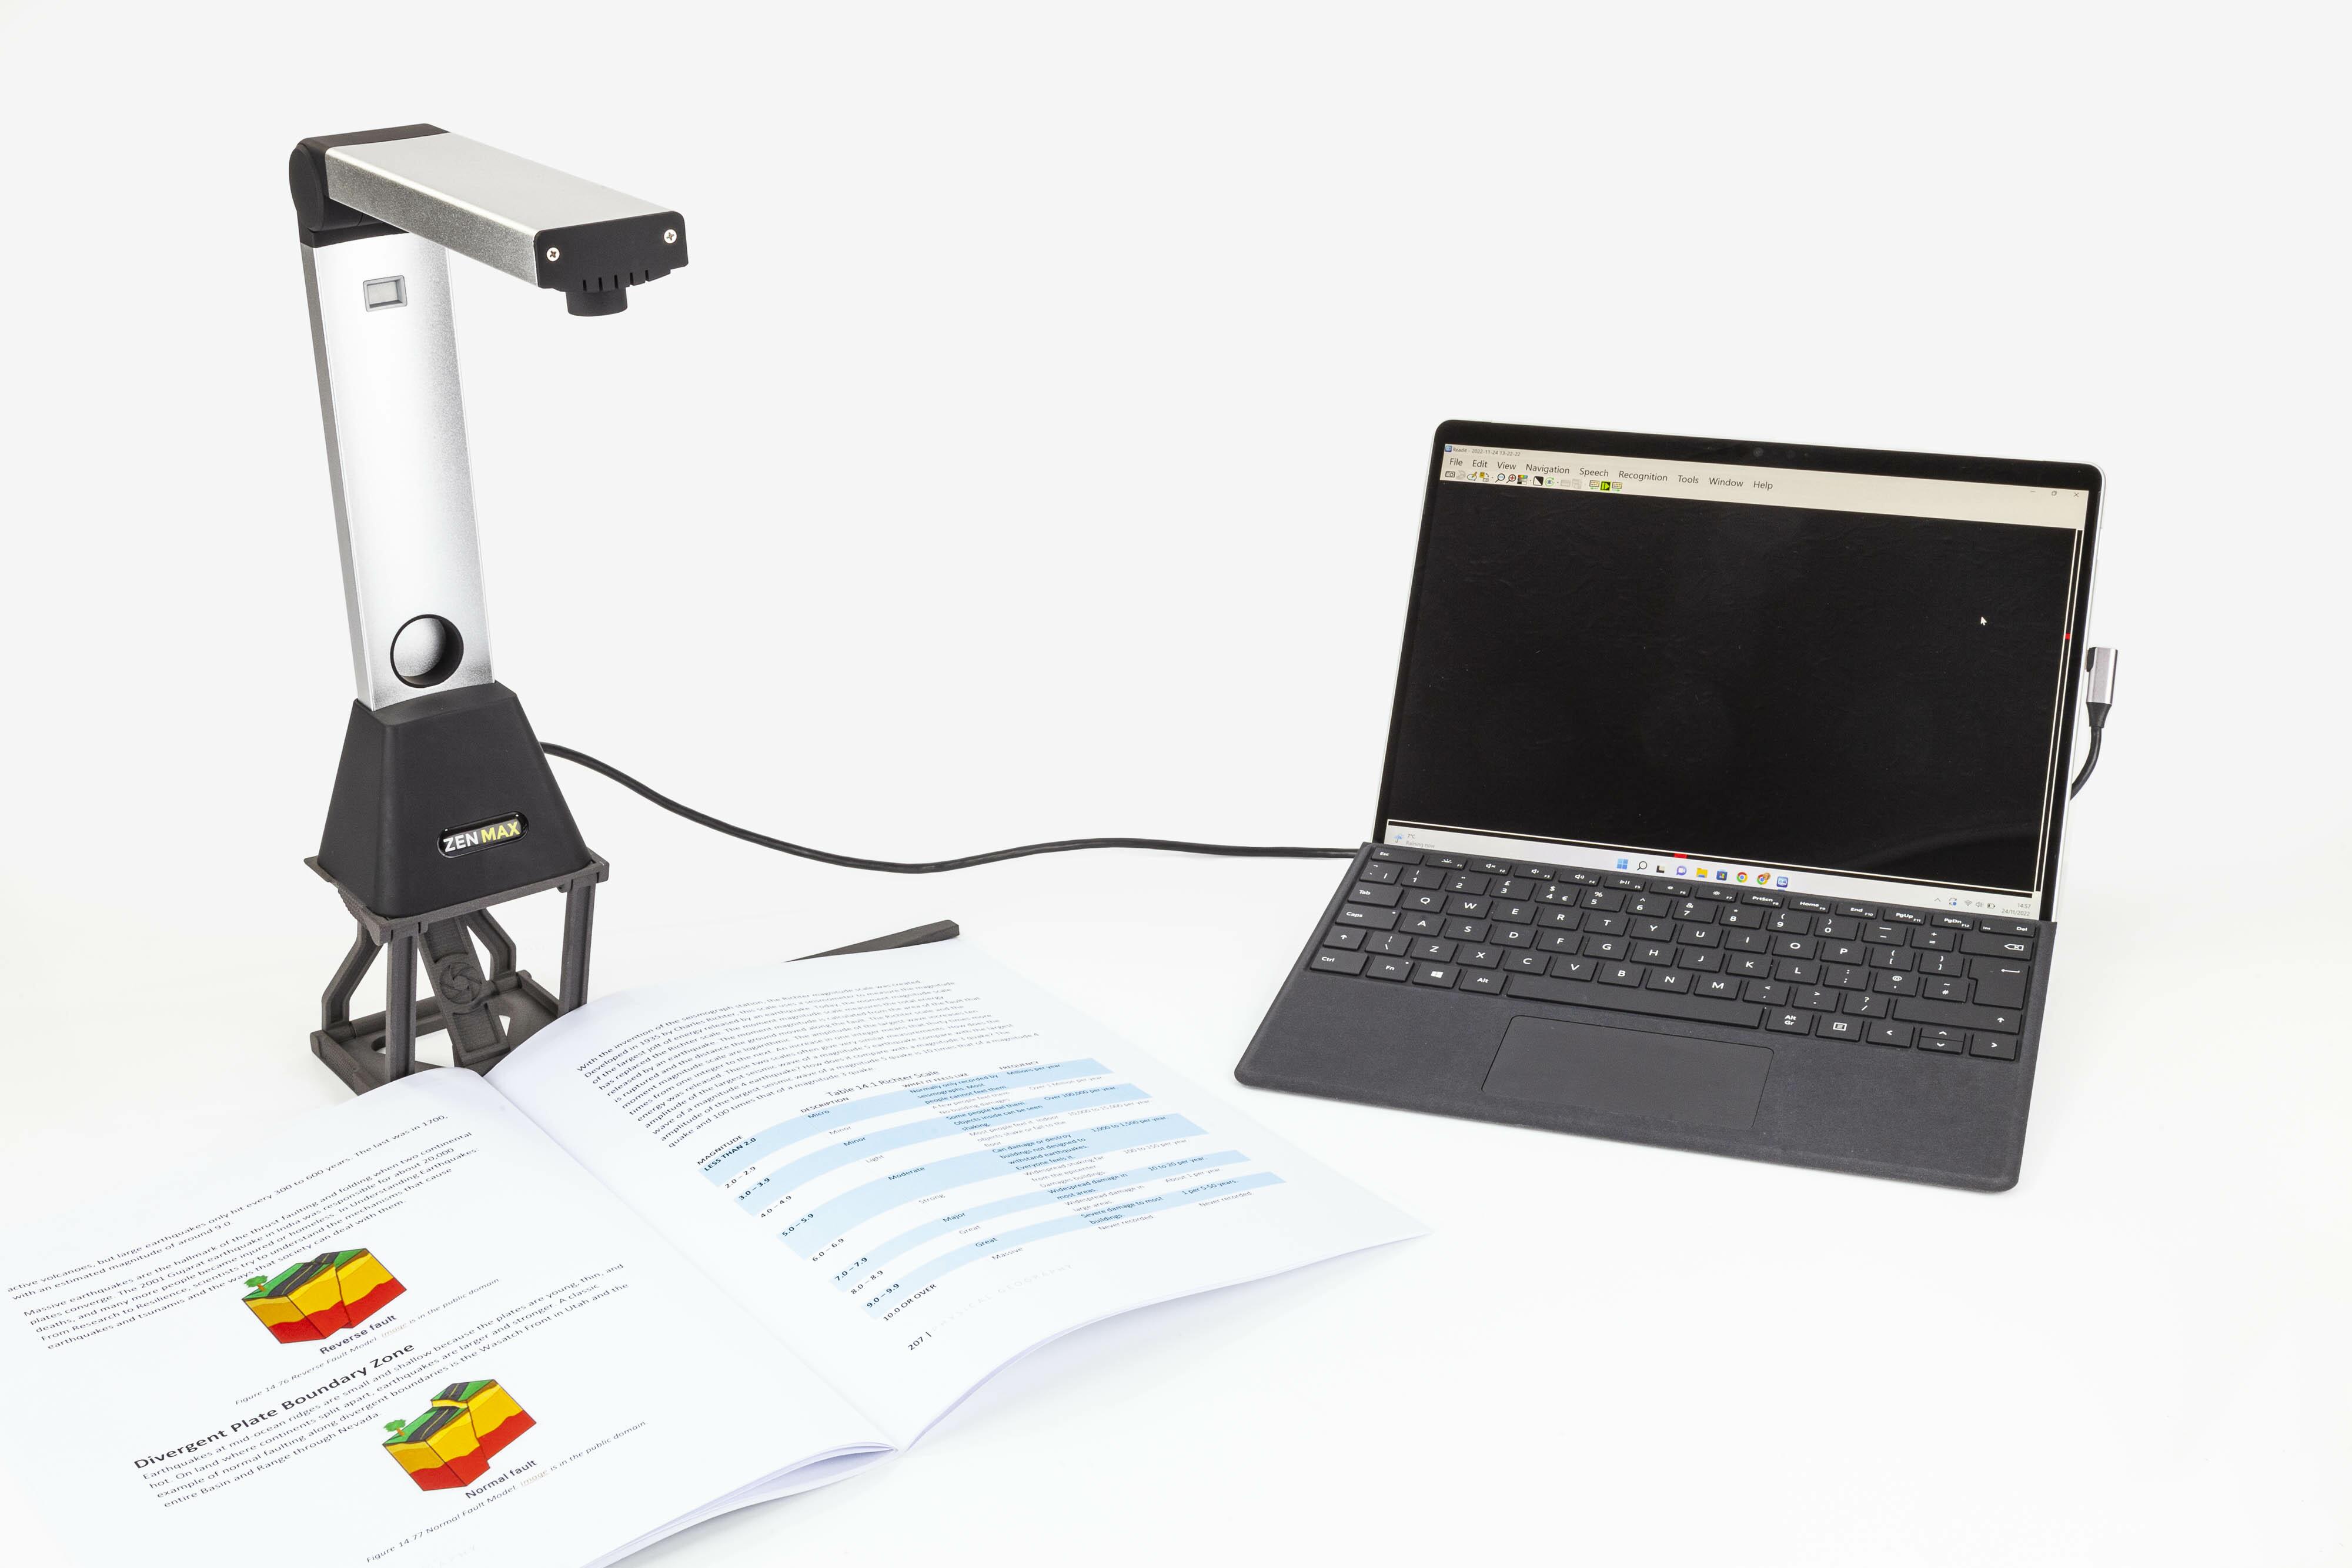 ZEN MAX camera attached to a laptop capturing a large textbook